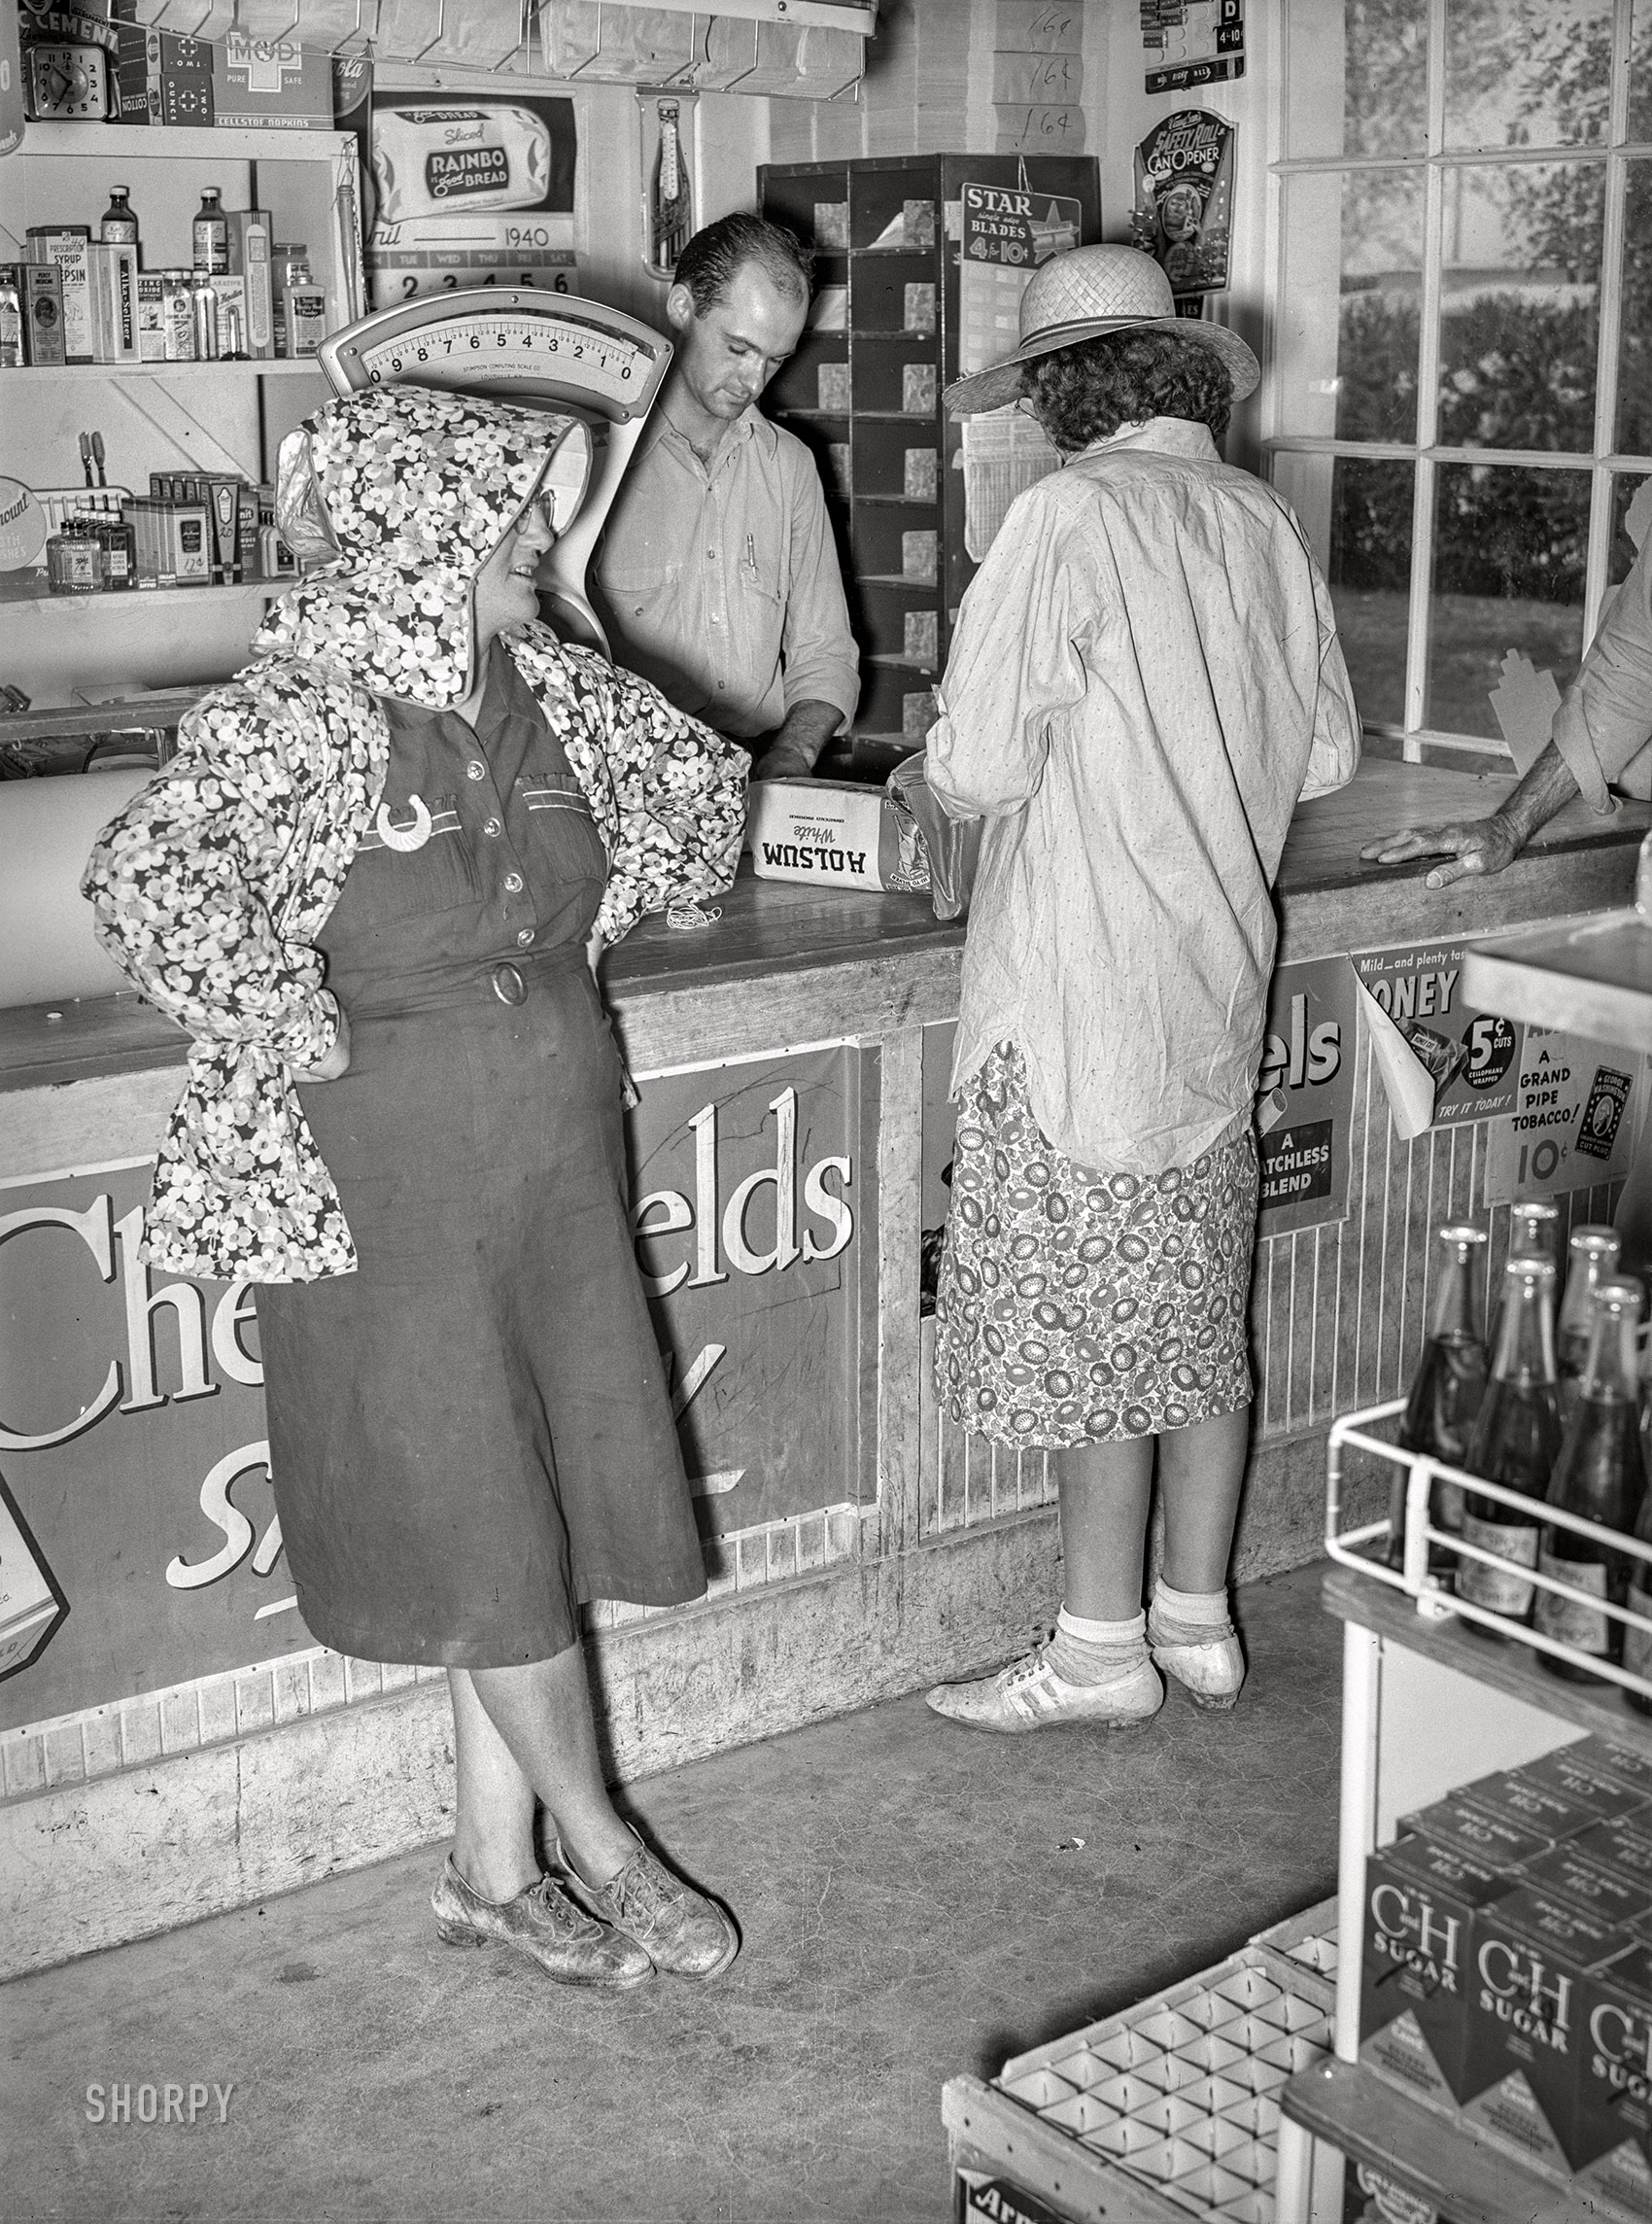 May 1940. "In the grocery store of the Casa Grande Valley Cooperative Farms. Pinal County, Arizona." Acetate negative by Russell Lee for the Farm Security Administration. View full size.